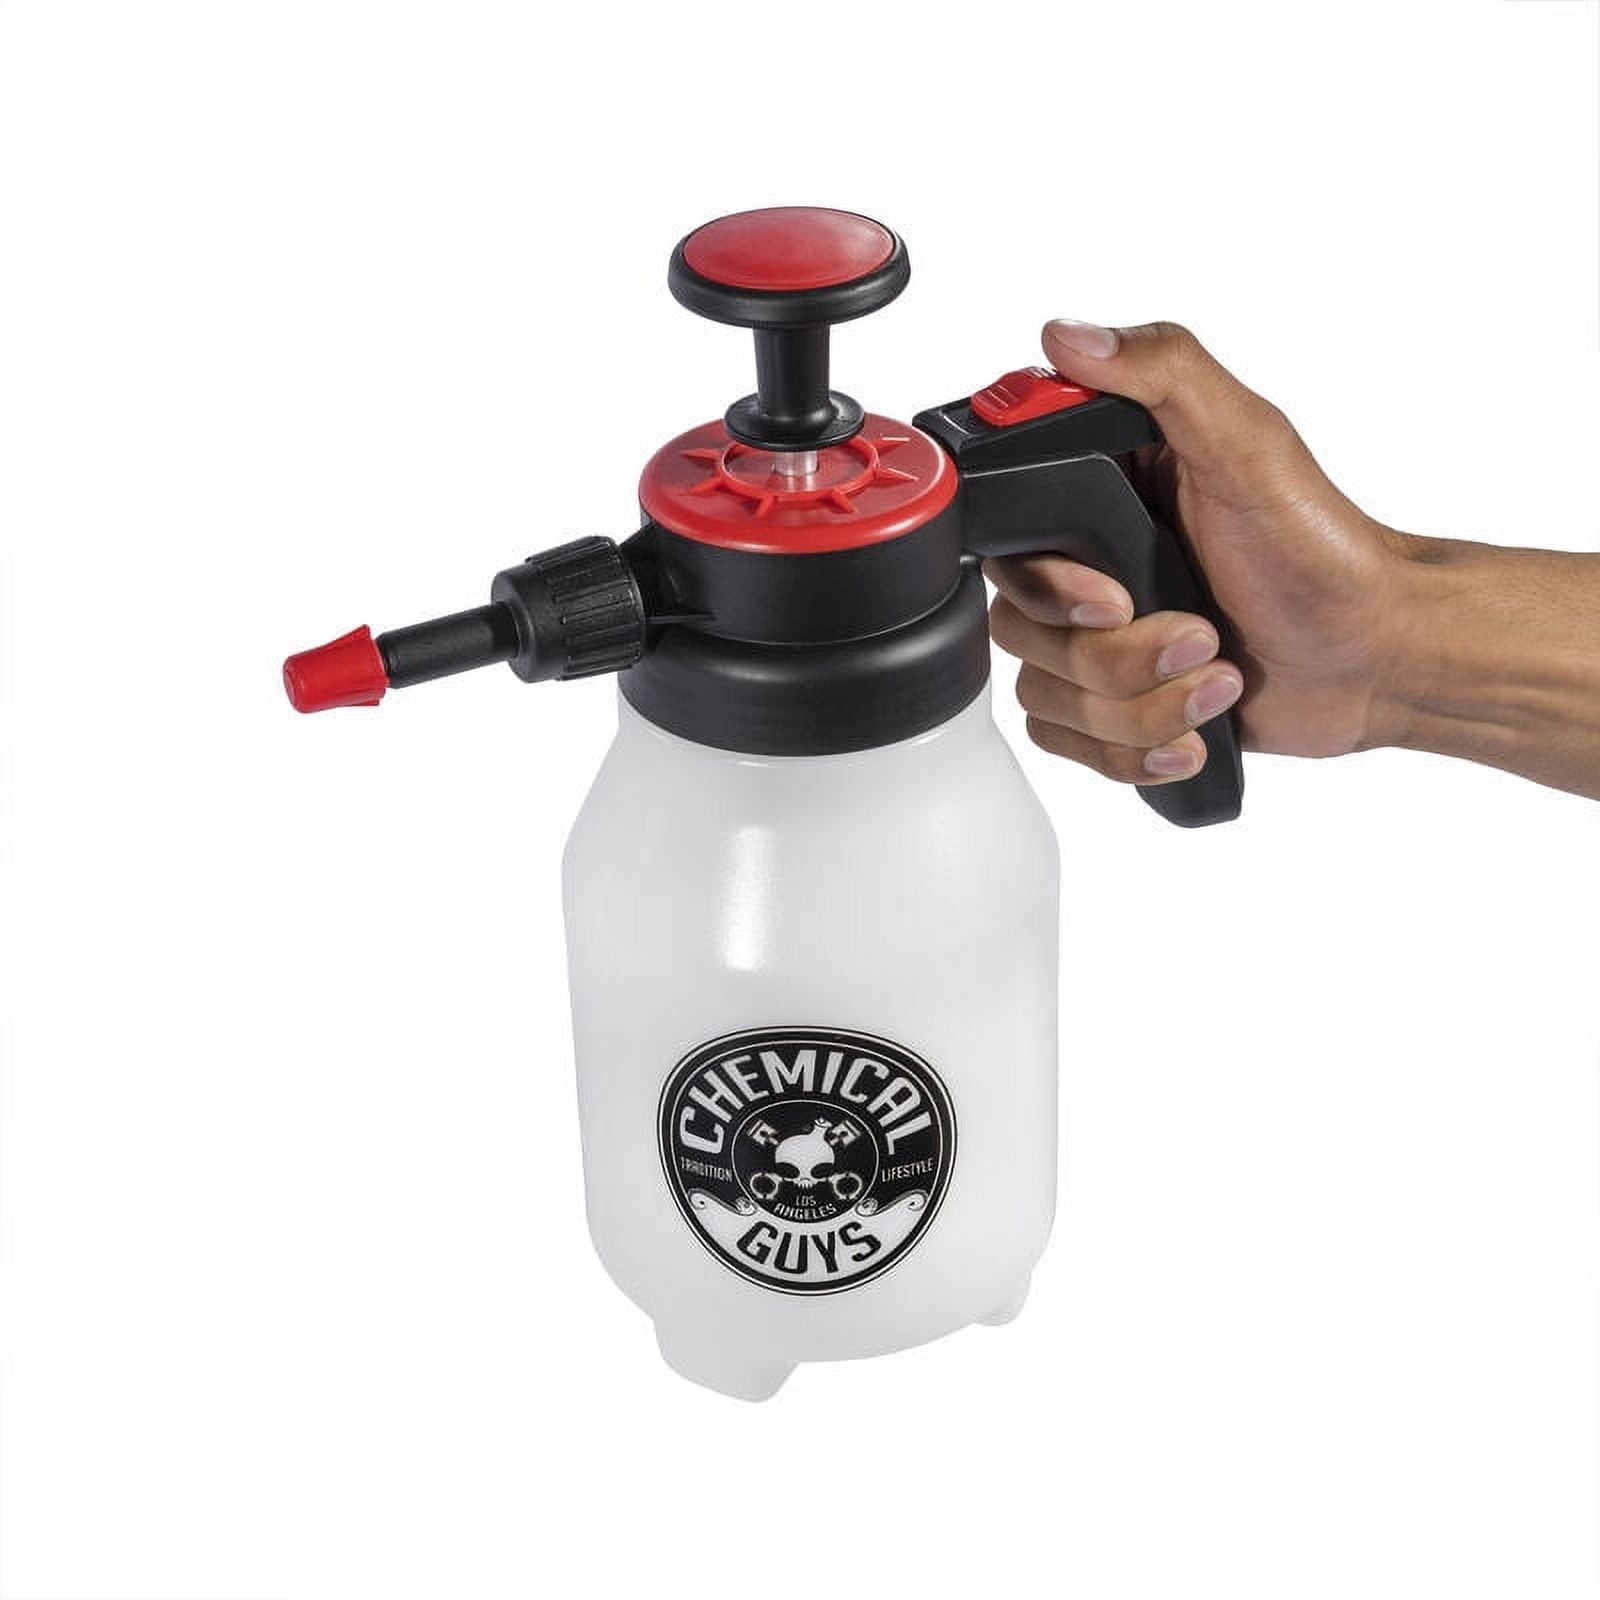 Quick REVIEW of the Chemical Guys Power Sprayer 